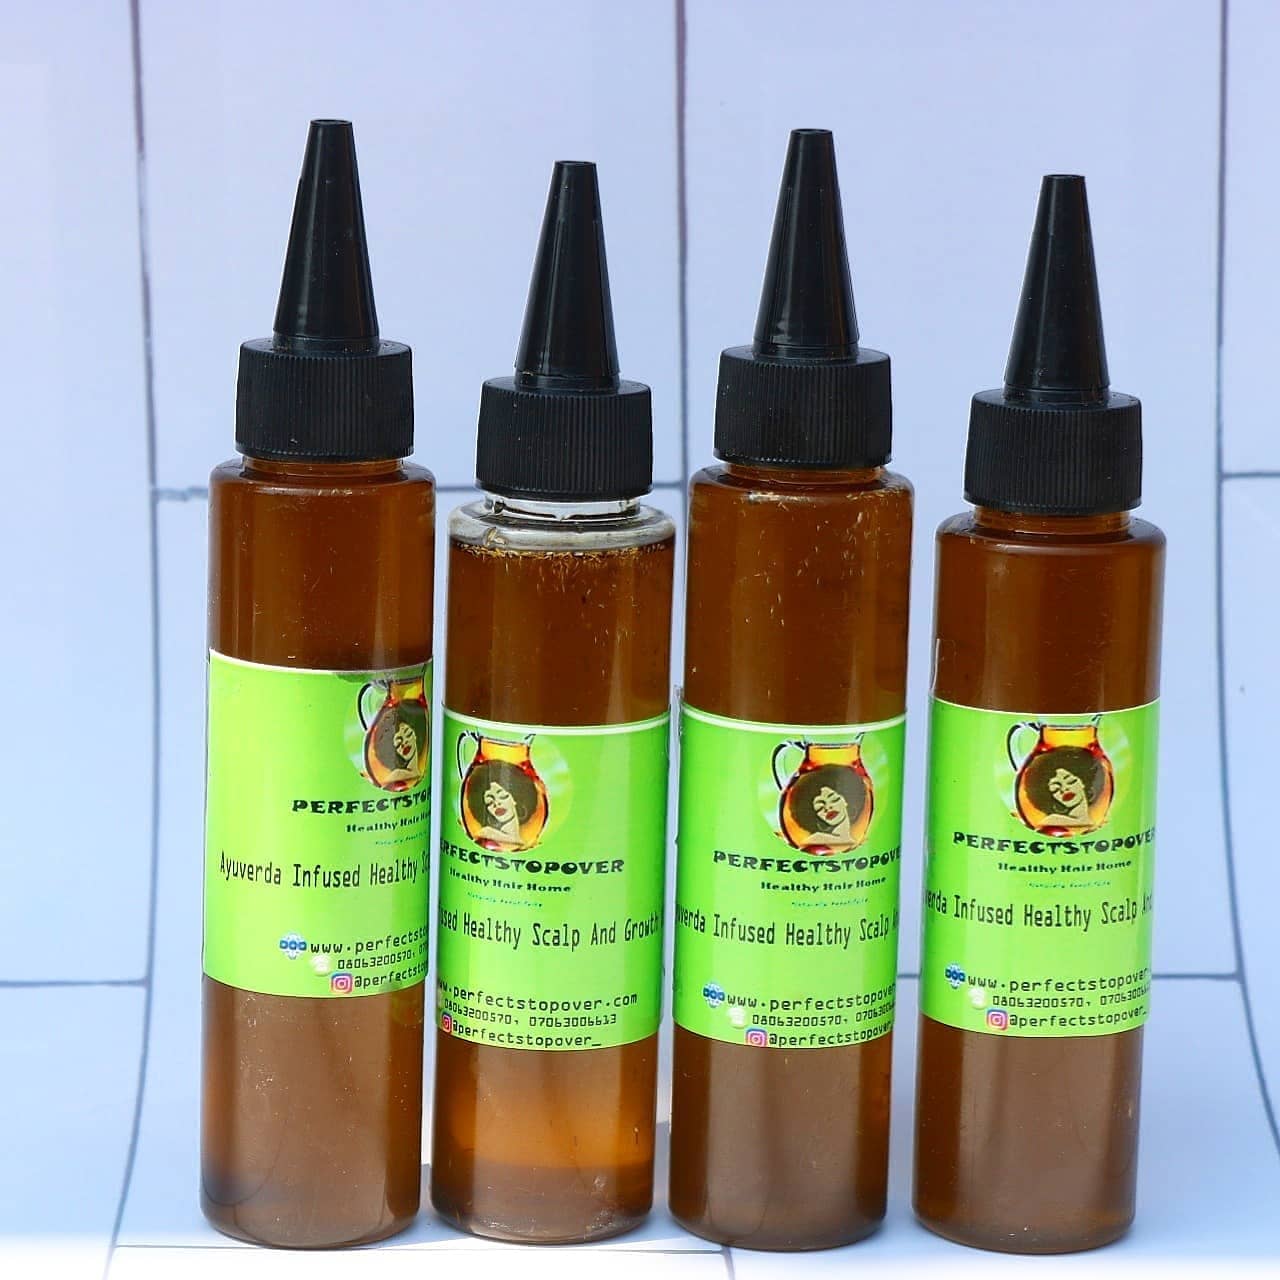 Perfectstopover Healthy hair and Volume Ayurveda infused oil (1pc)